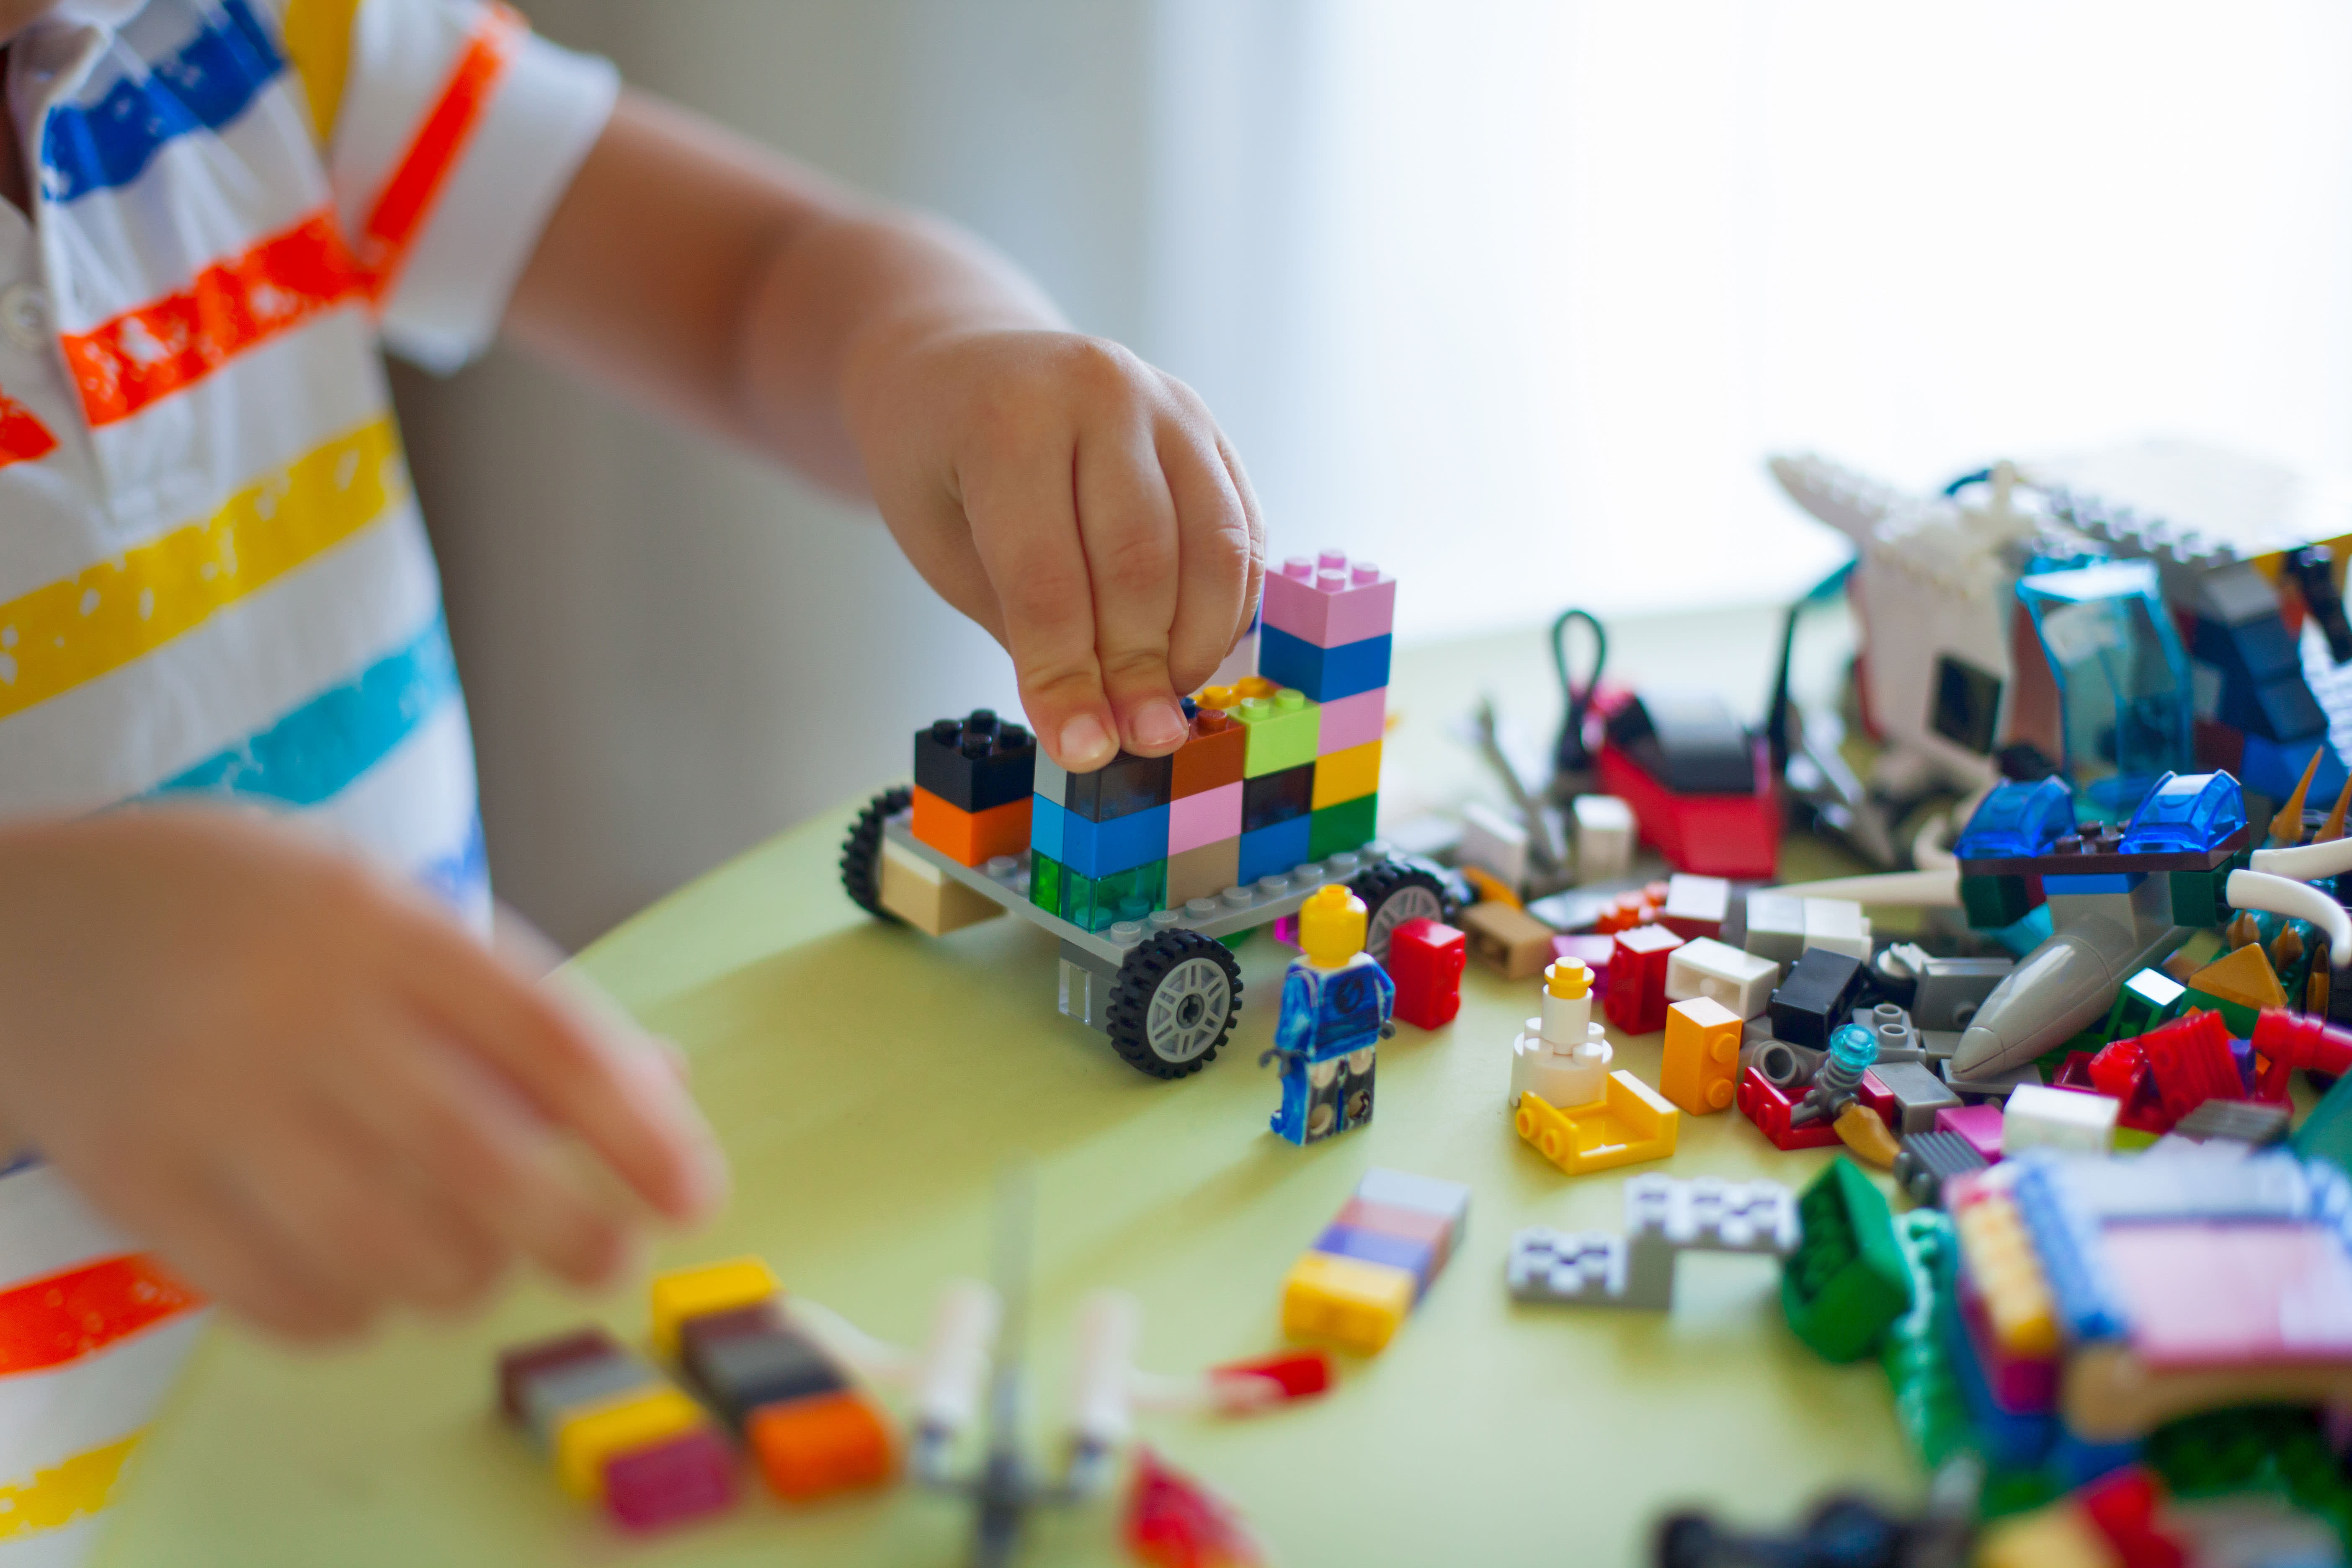 LEGO Storage: Why I Use a Color-Coded System for Storing LEGOS